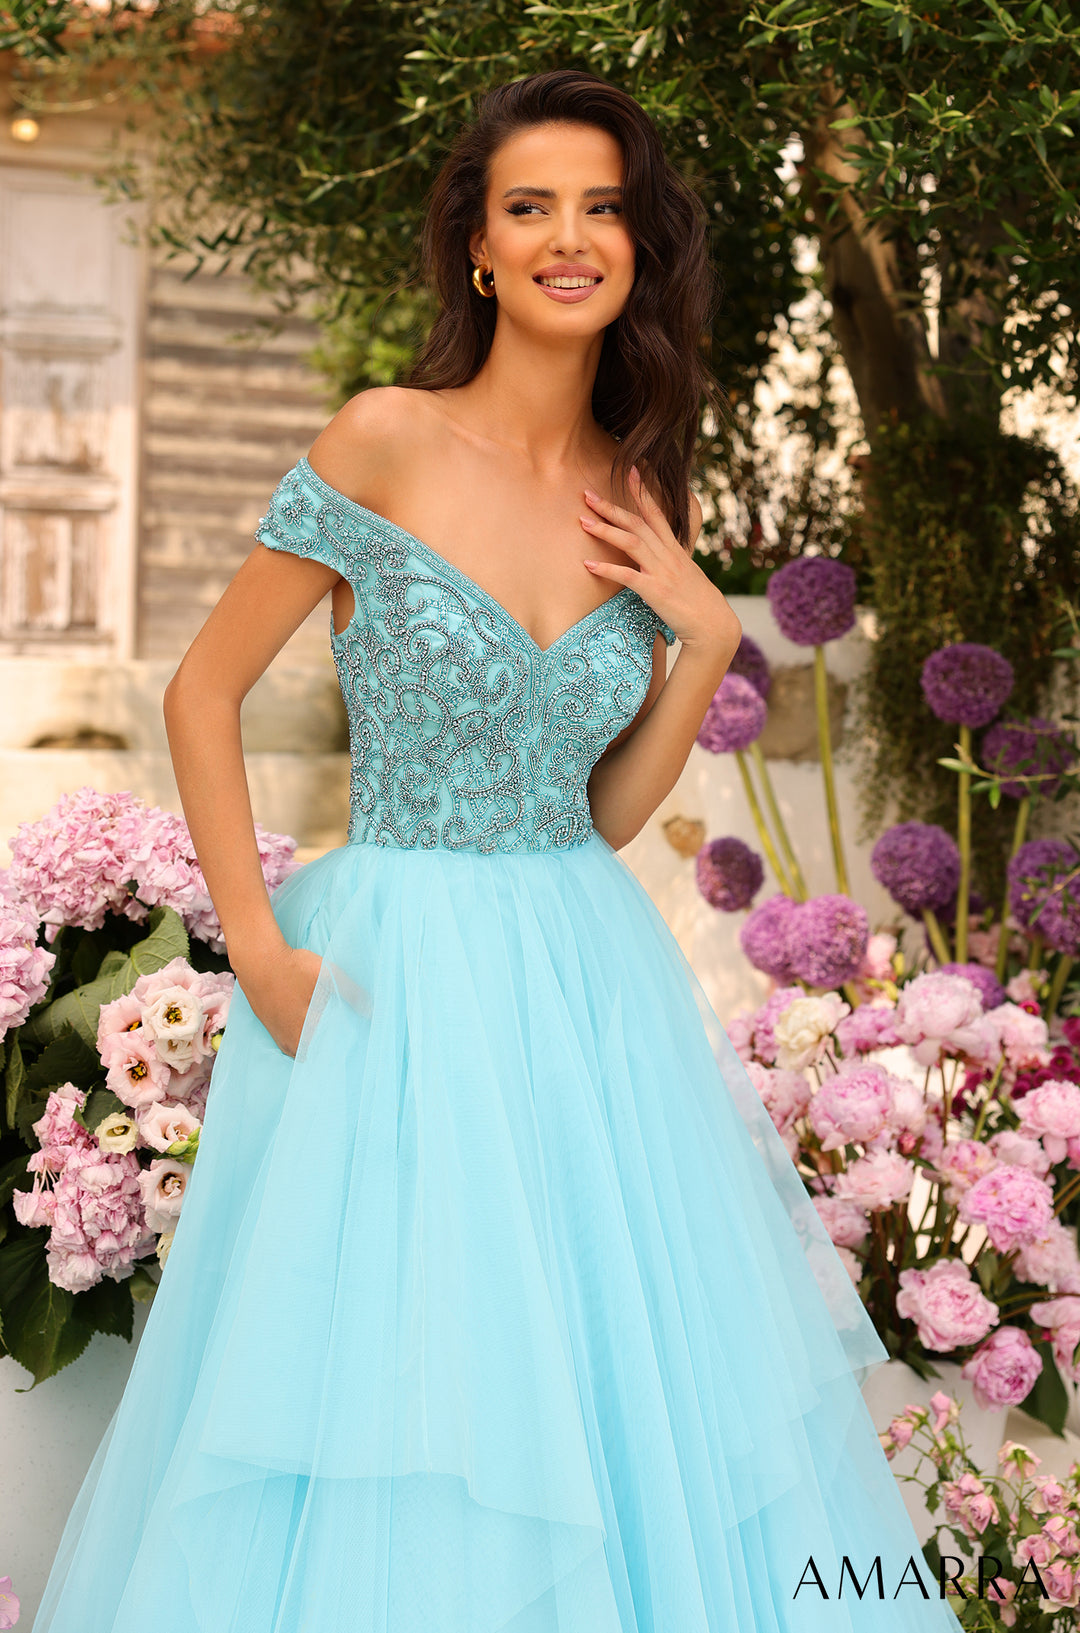 Beaded Off Shoulder Tulle Ball Gown by Amarra 94038